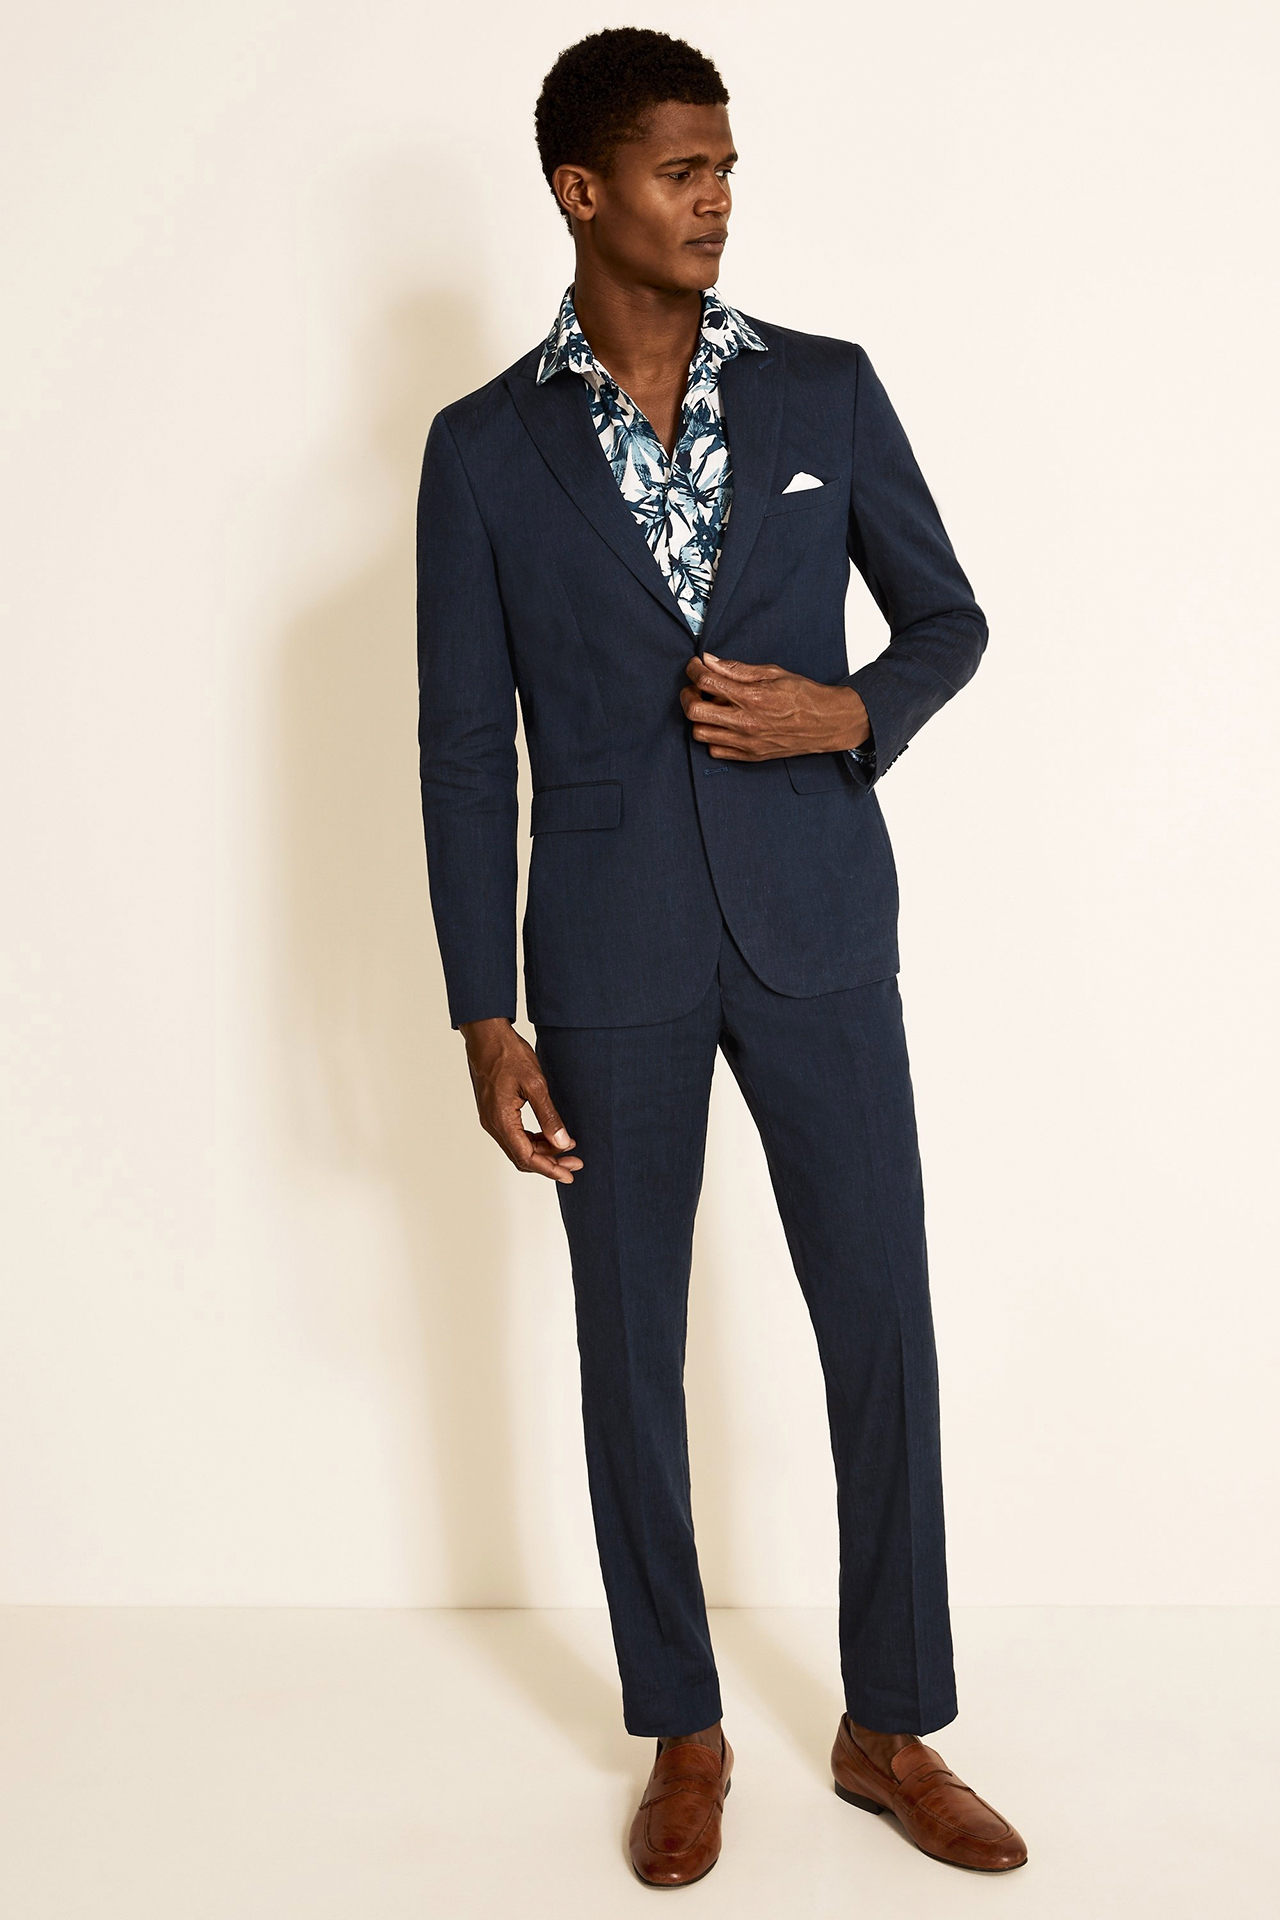 Navy linen suit, blue floral shirt, and brown loafers